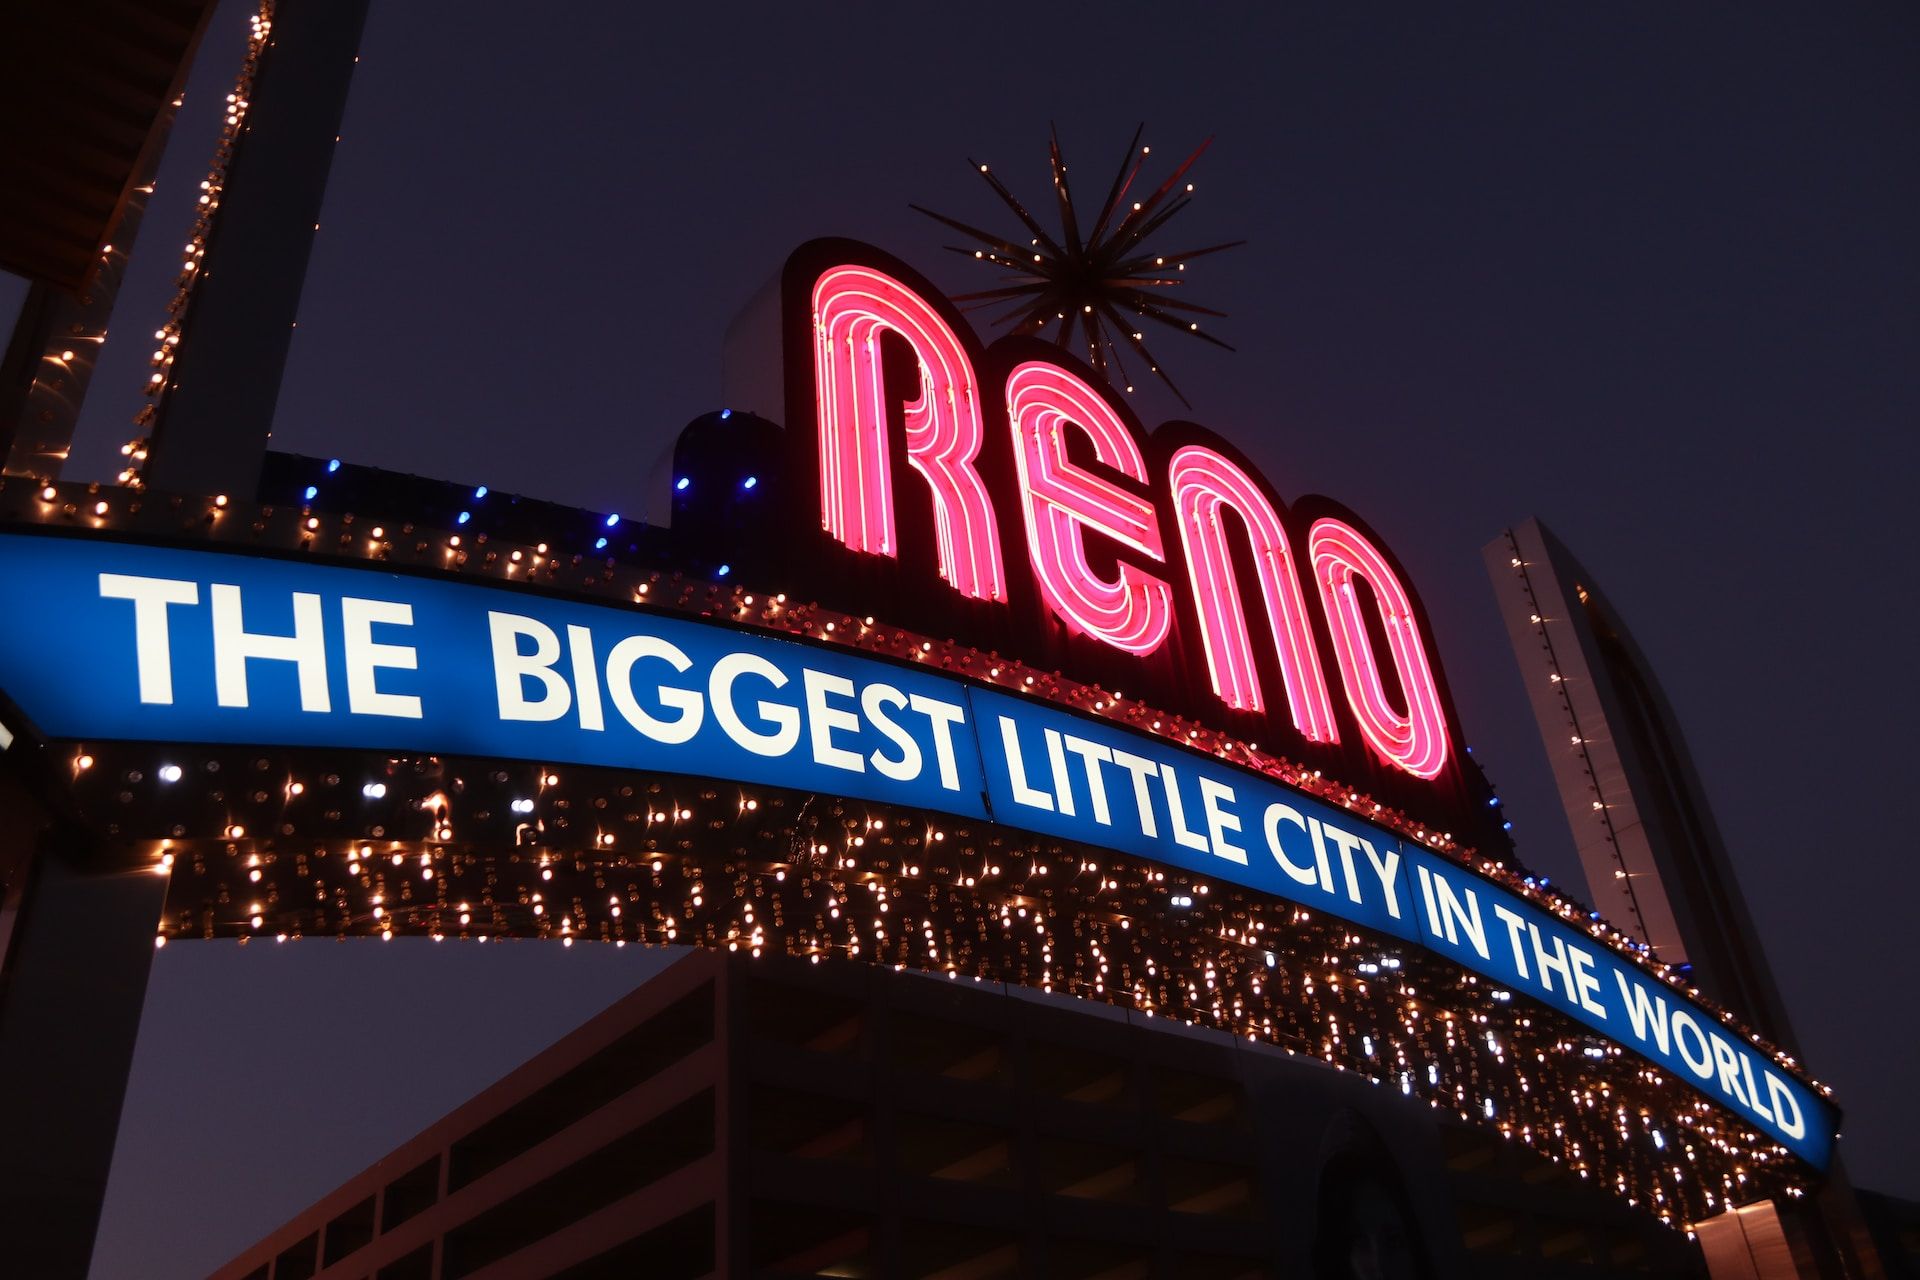 Reno the Biggest Little City in the World